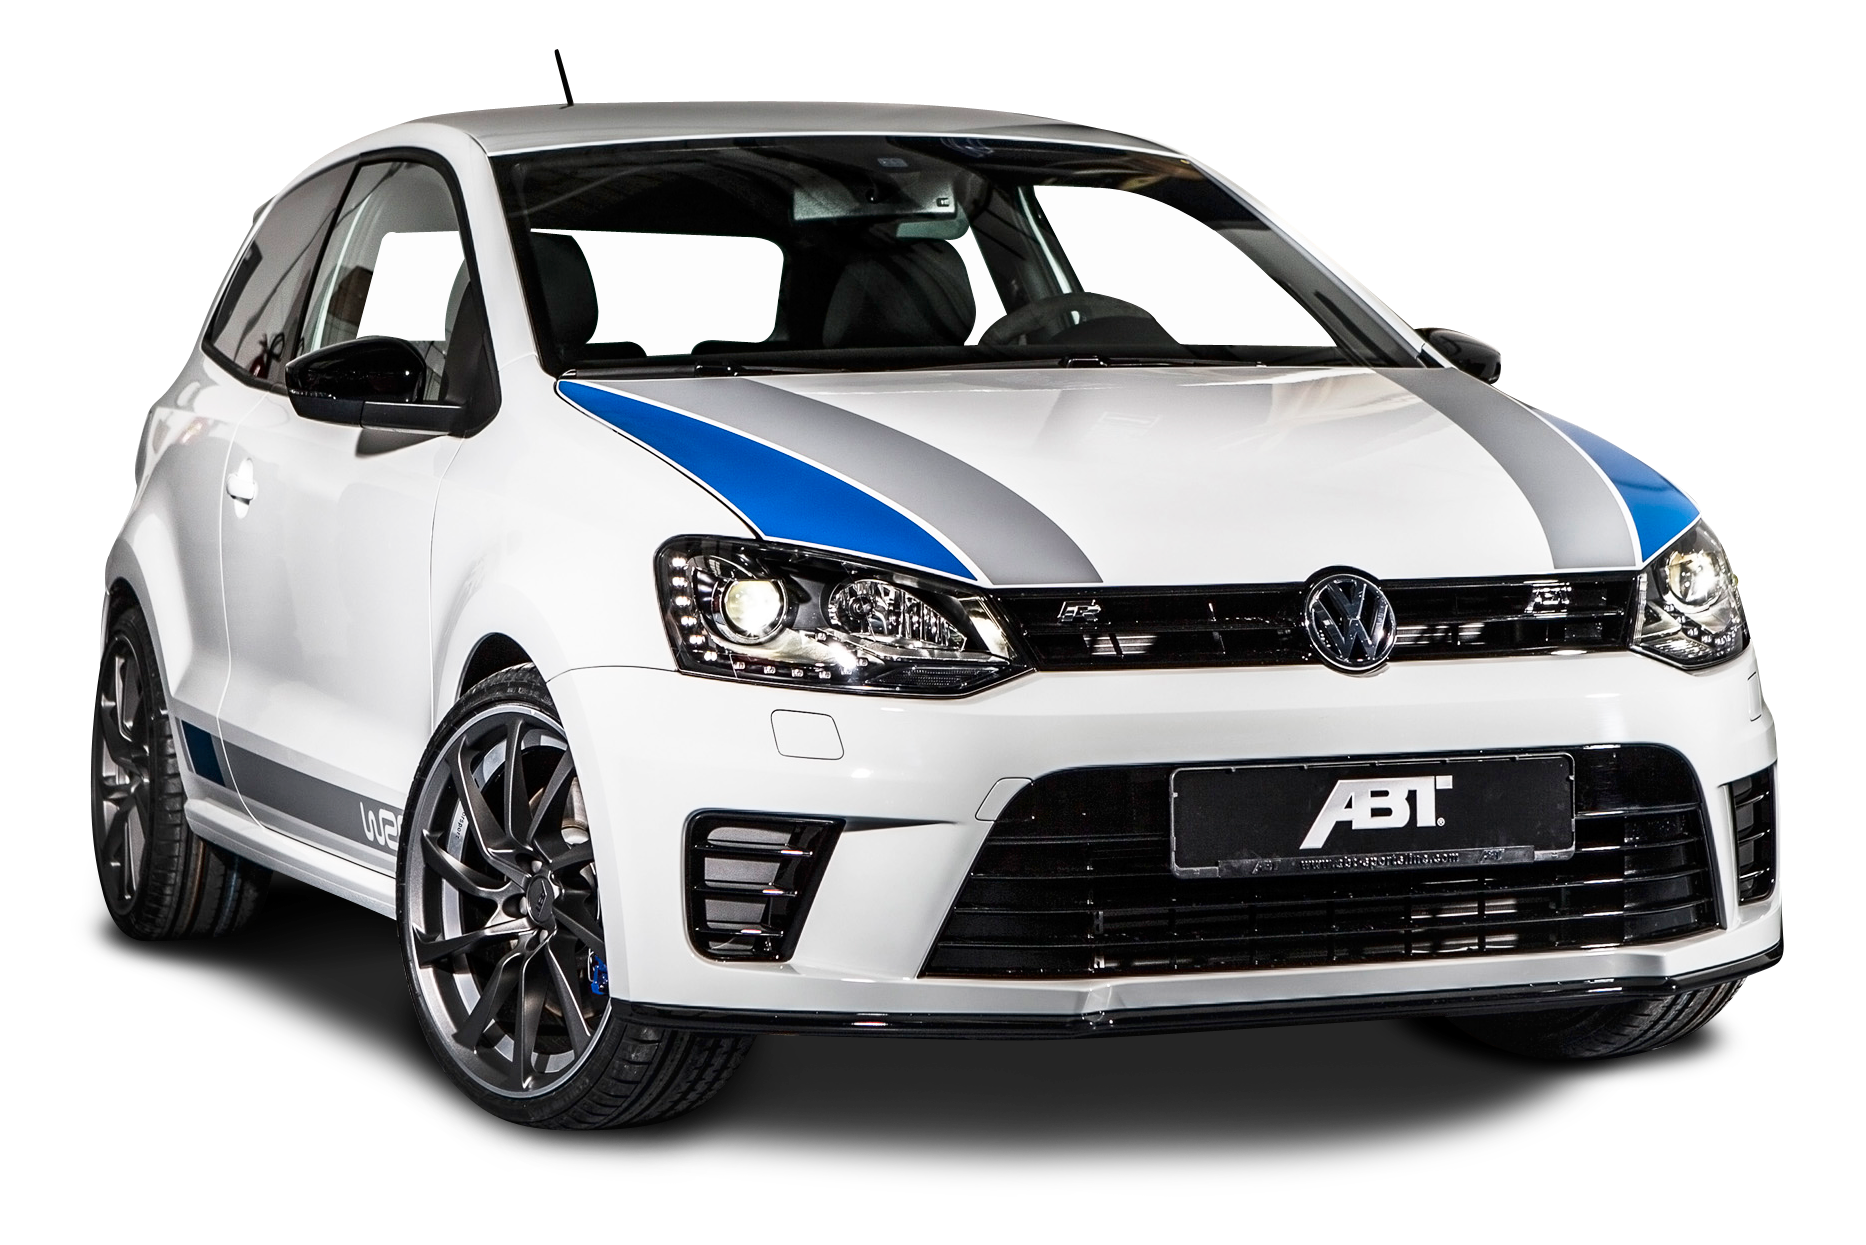 Volkswagen Polo R Wrc Car Png Image - Volkswagen, Transparent background PNG HD thumbnail